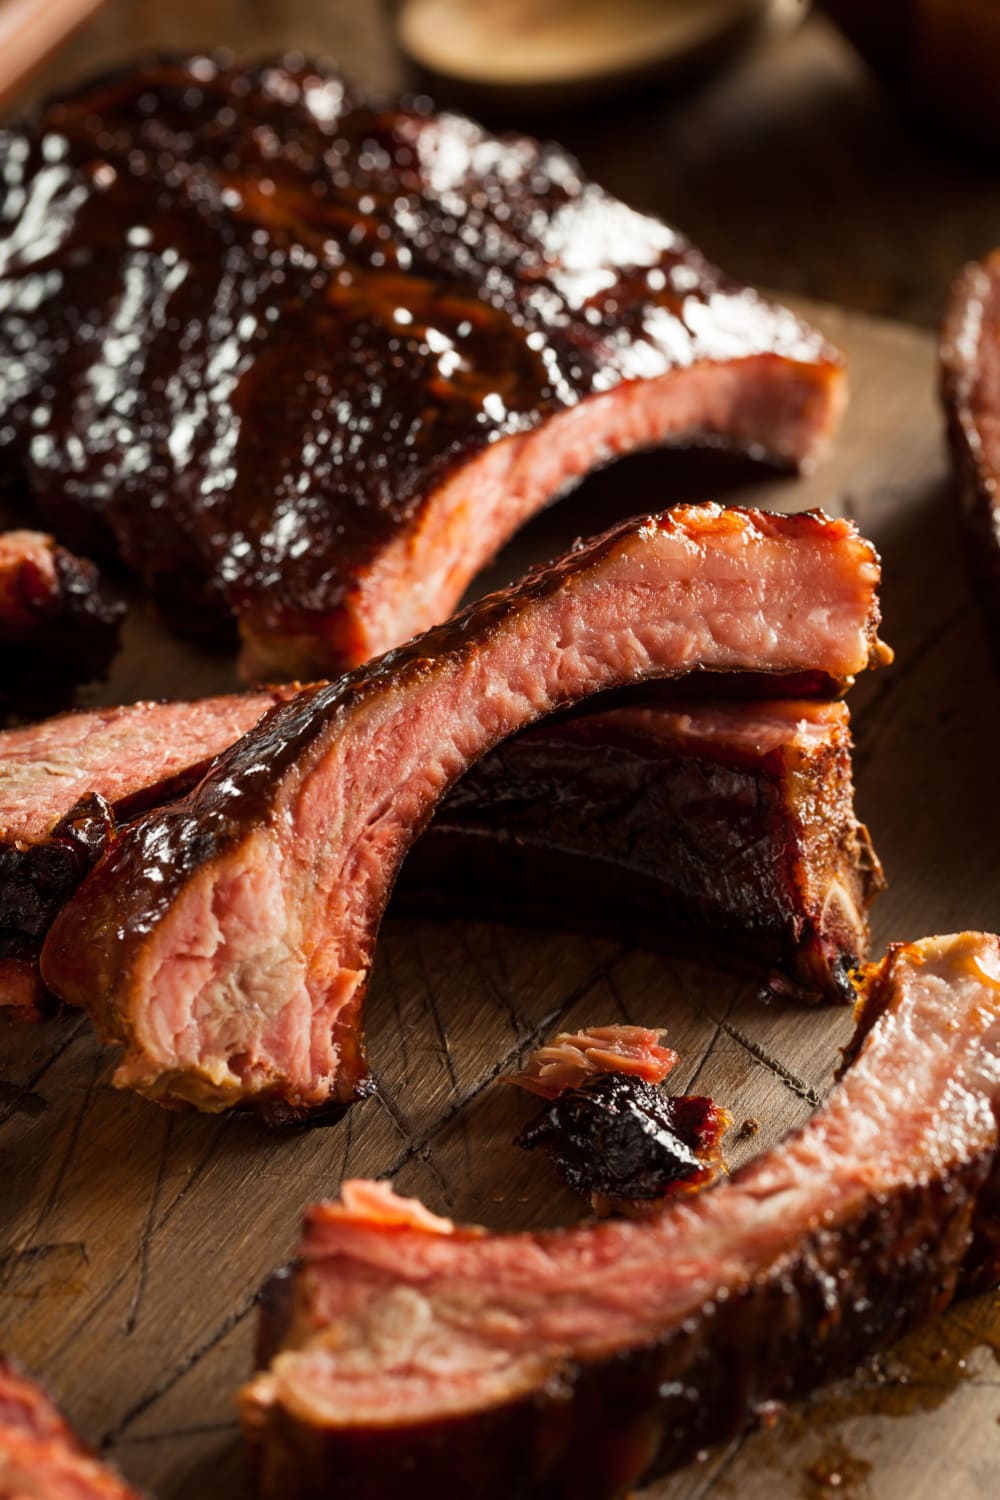 Sliced Oven Baked Baby Back Ribs on Wooden Cutting Board